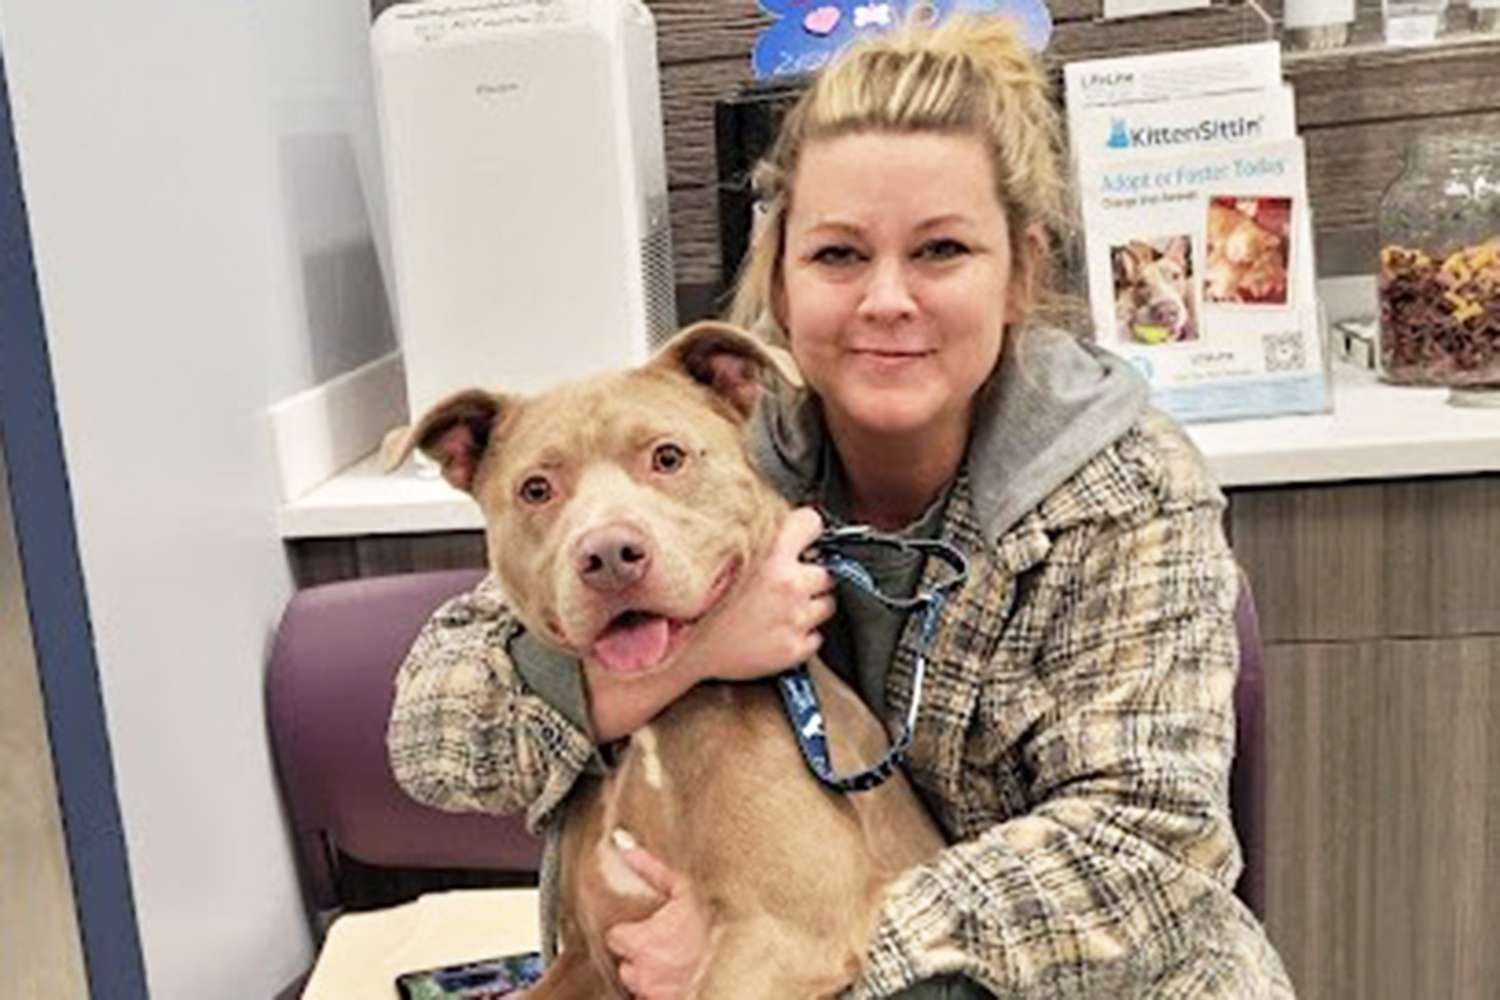 Heartwarming Tale: Dog Finds New Home After Year in Shelter